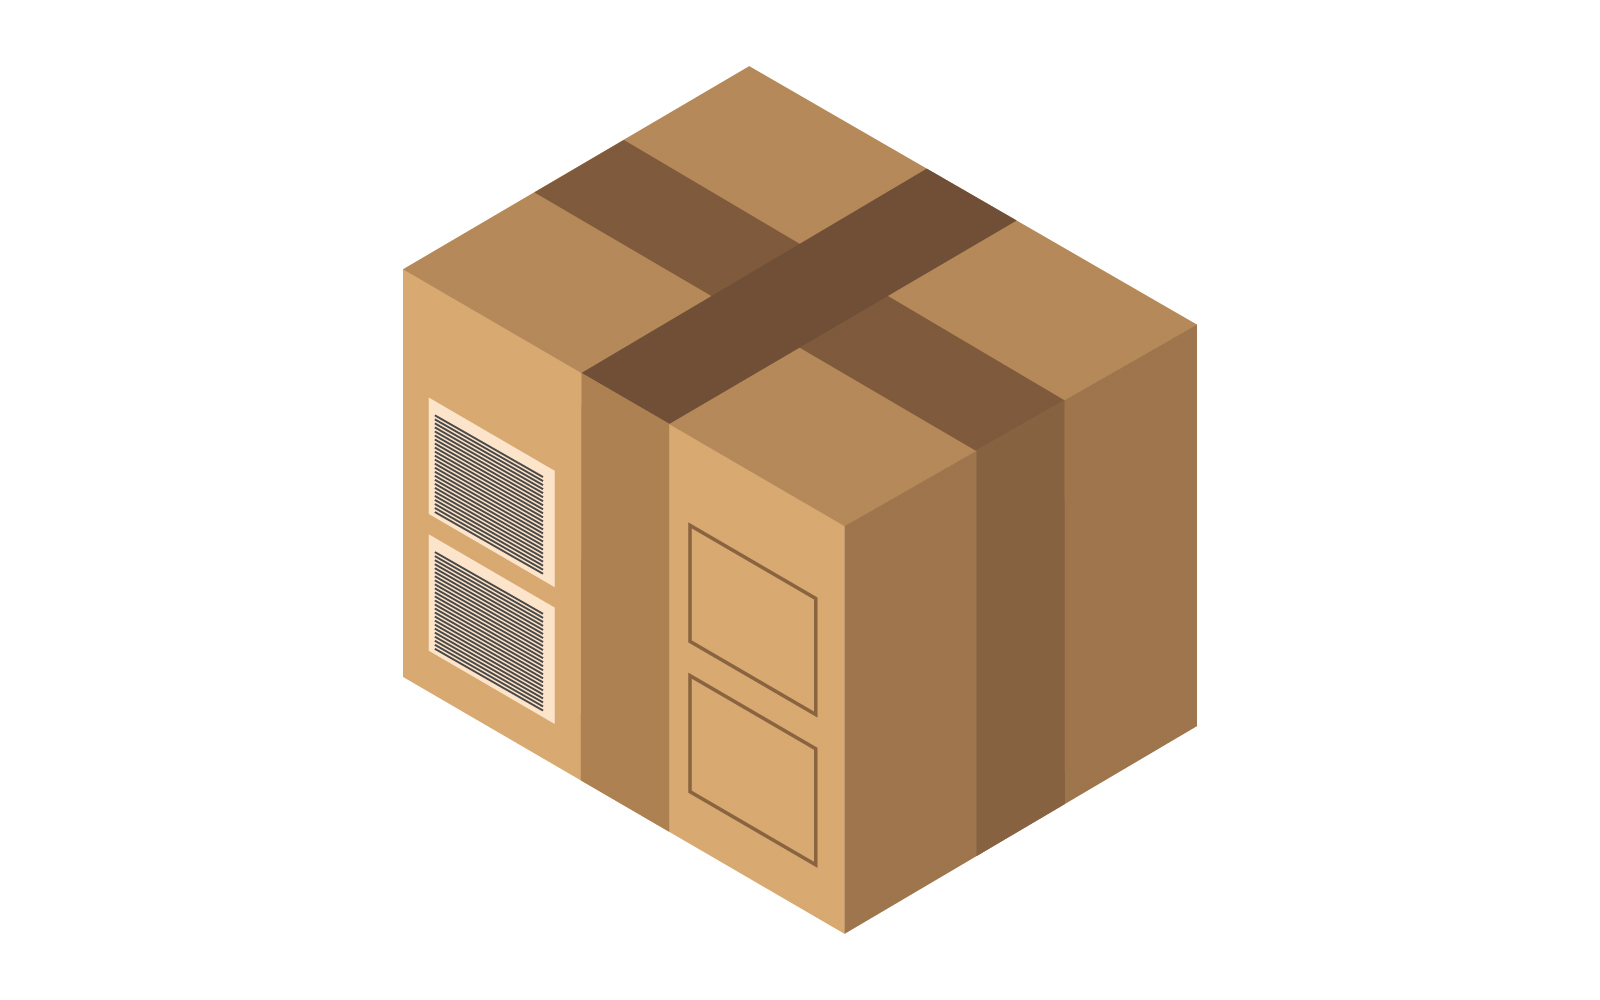 Isometric box colored and illustrated in vector on a white background